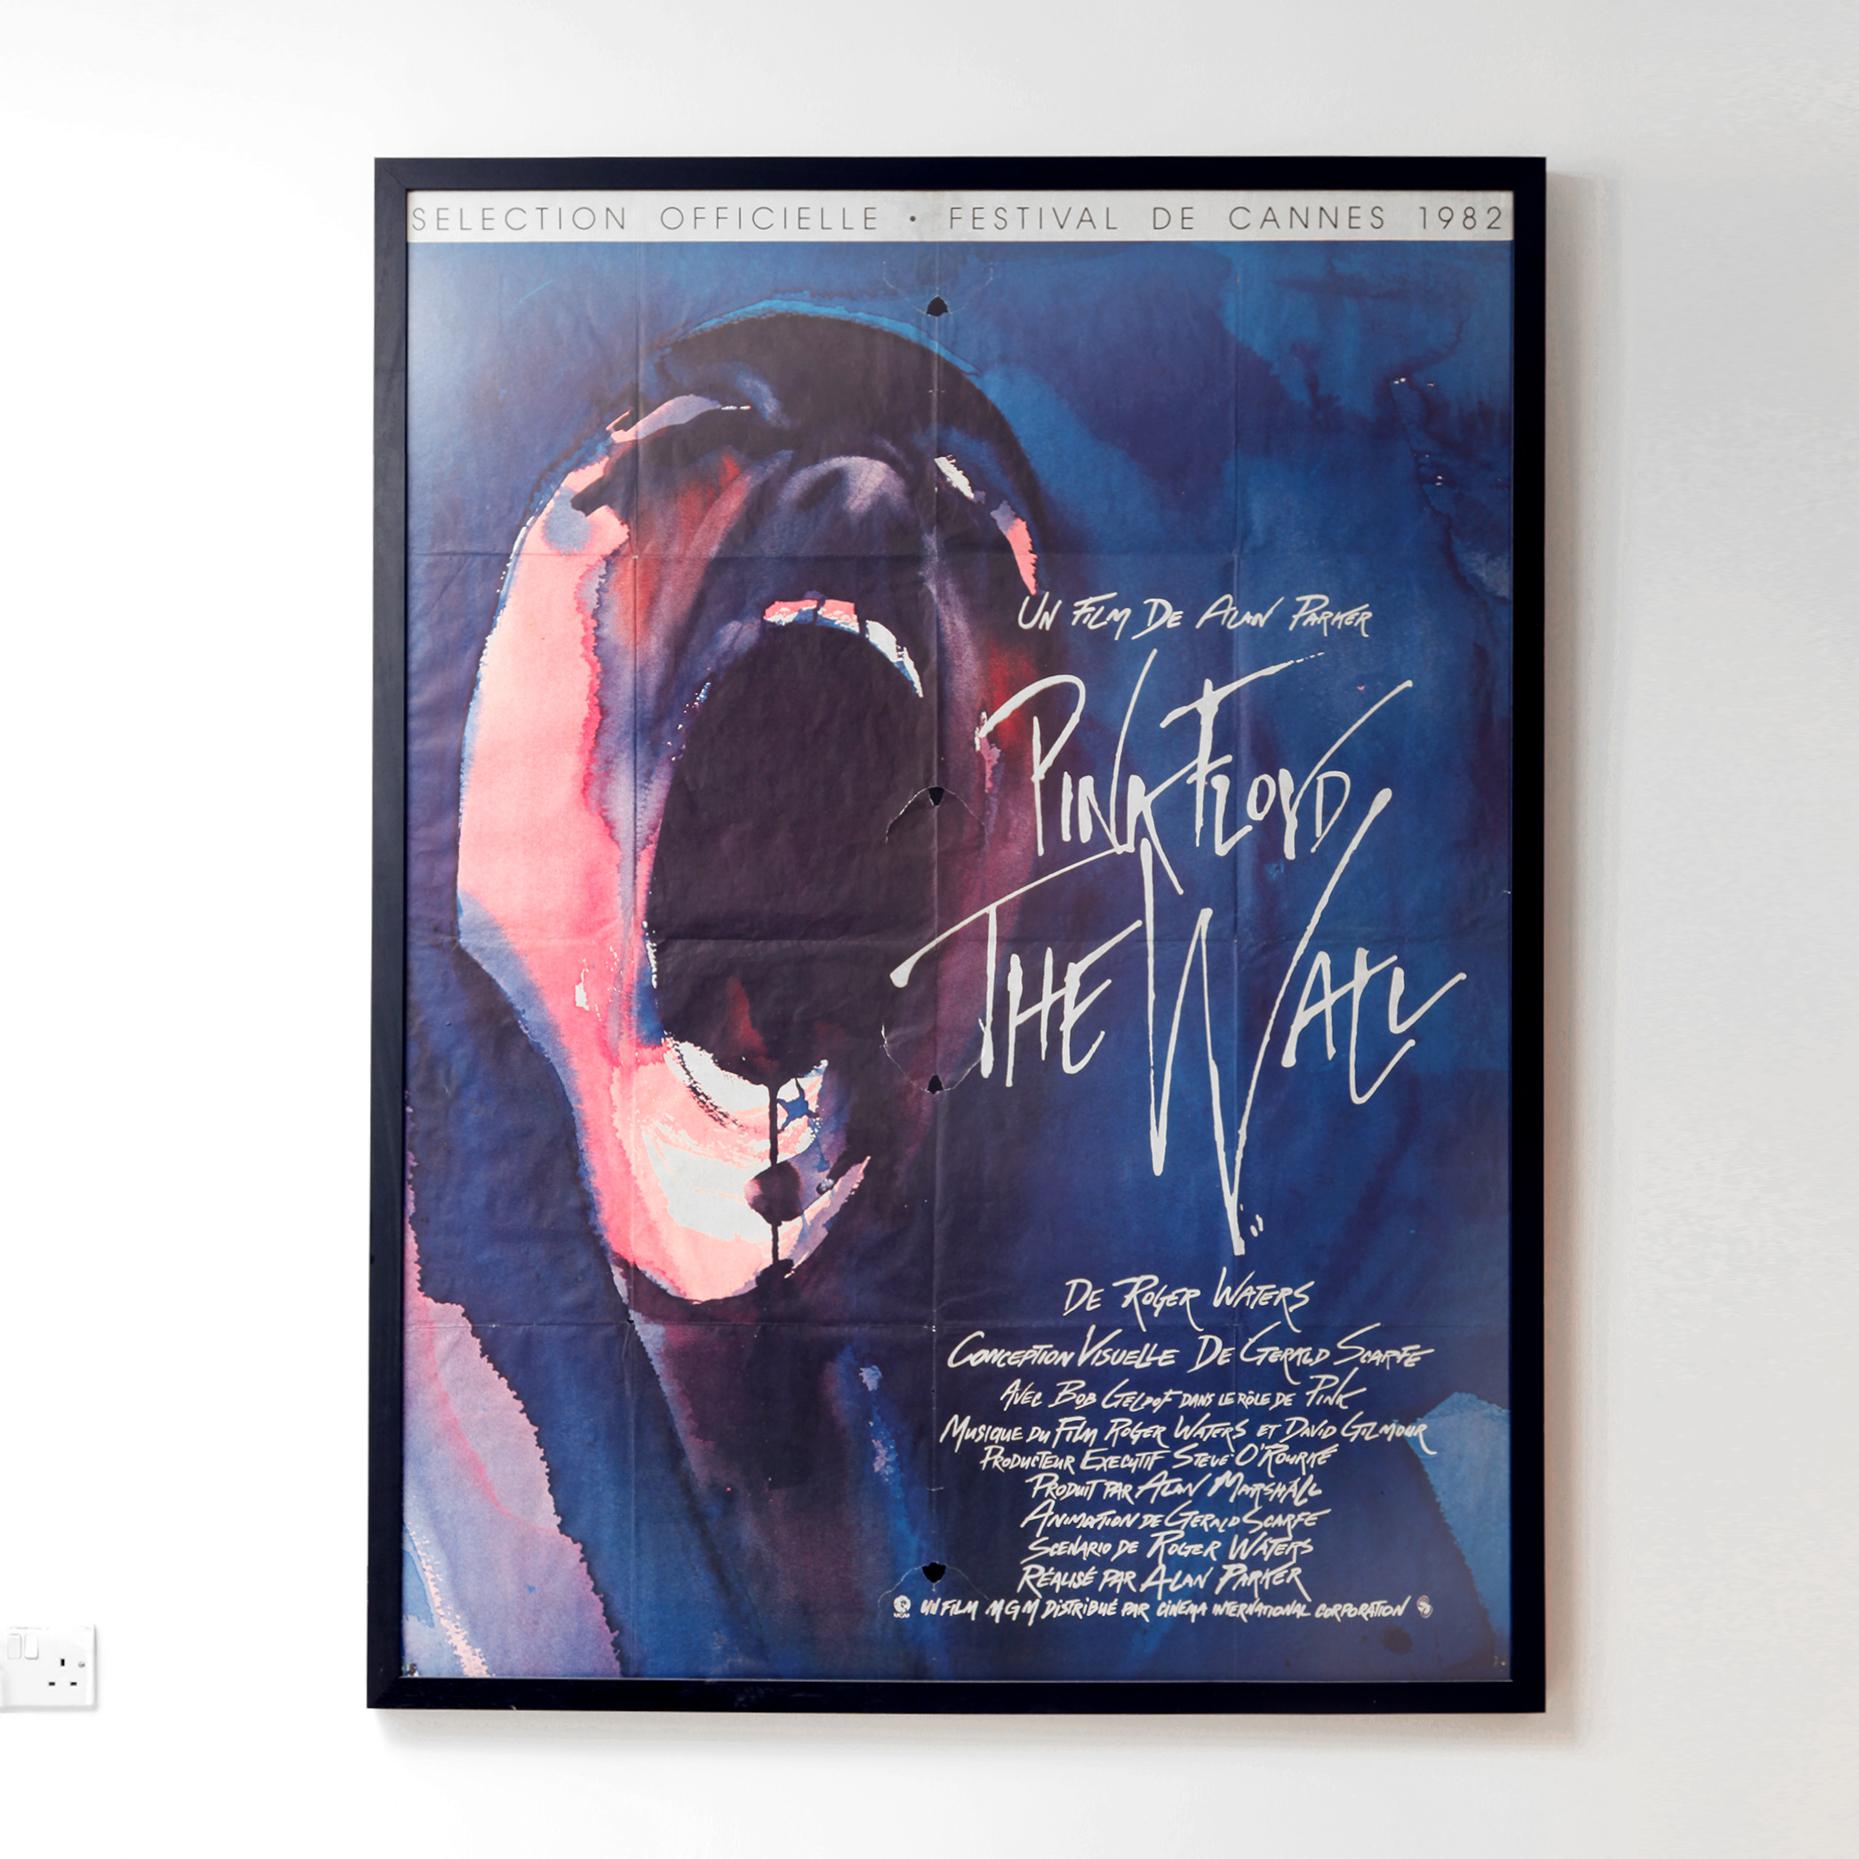 Rare large original first edition poster from the musical of Pink Floyd 